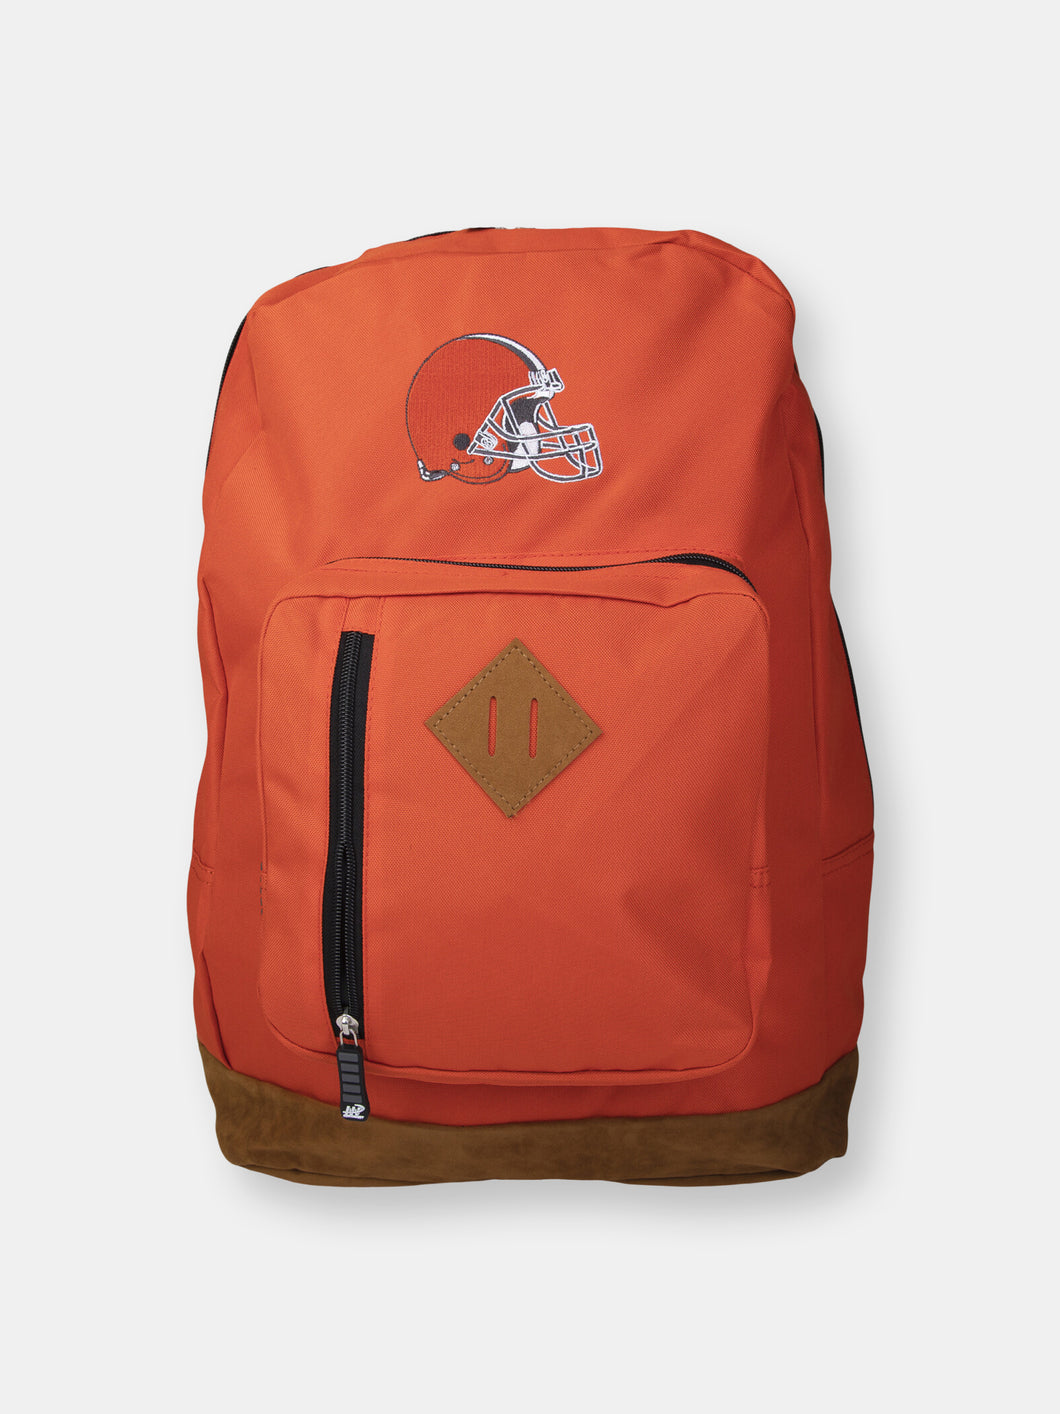 The Northwest Company Officially Licensed NFL Playbook Backpack